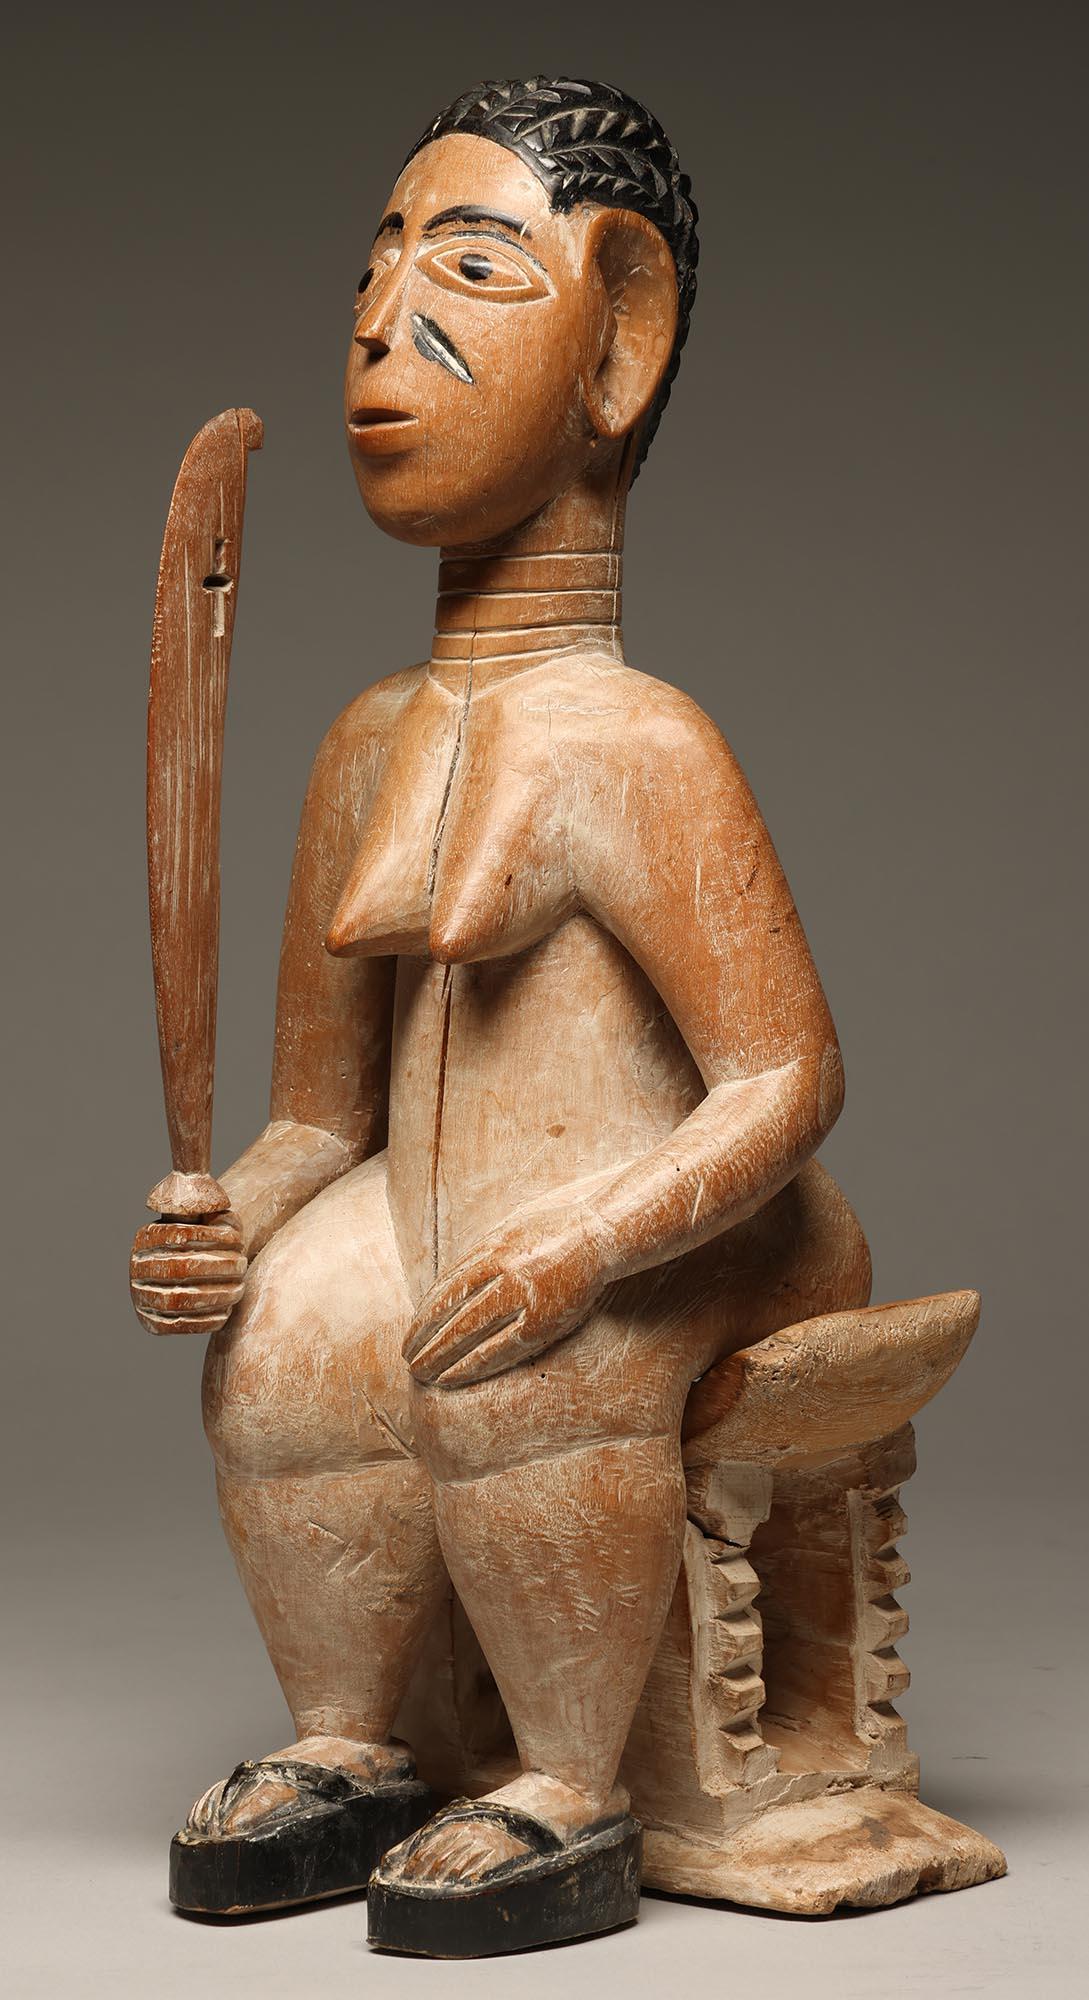 Seated female figure on classic Akan stool holding a sword.  From the Ewe people of Ghana, West Africa. Created as three separate pieces that fit together for display, figure, stool and sword. Traces of white, black painted accents on hair eyes and